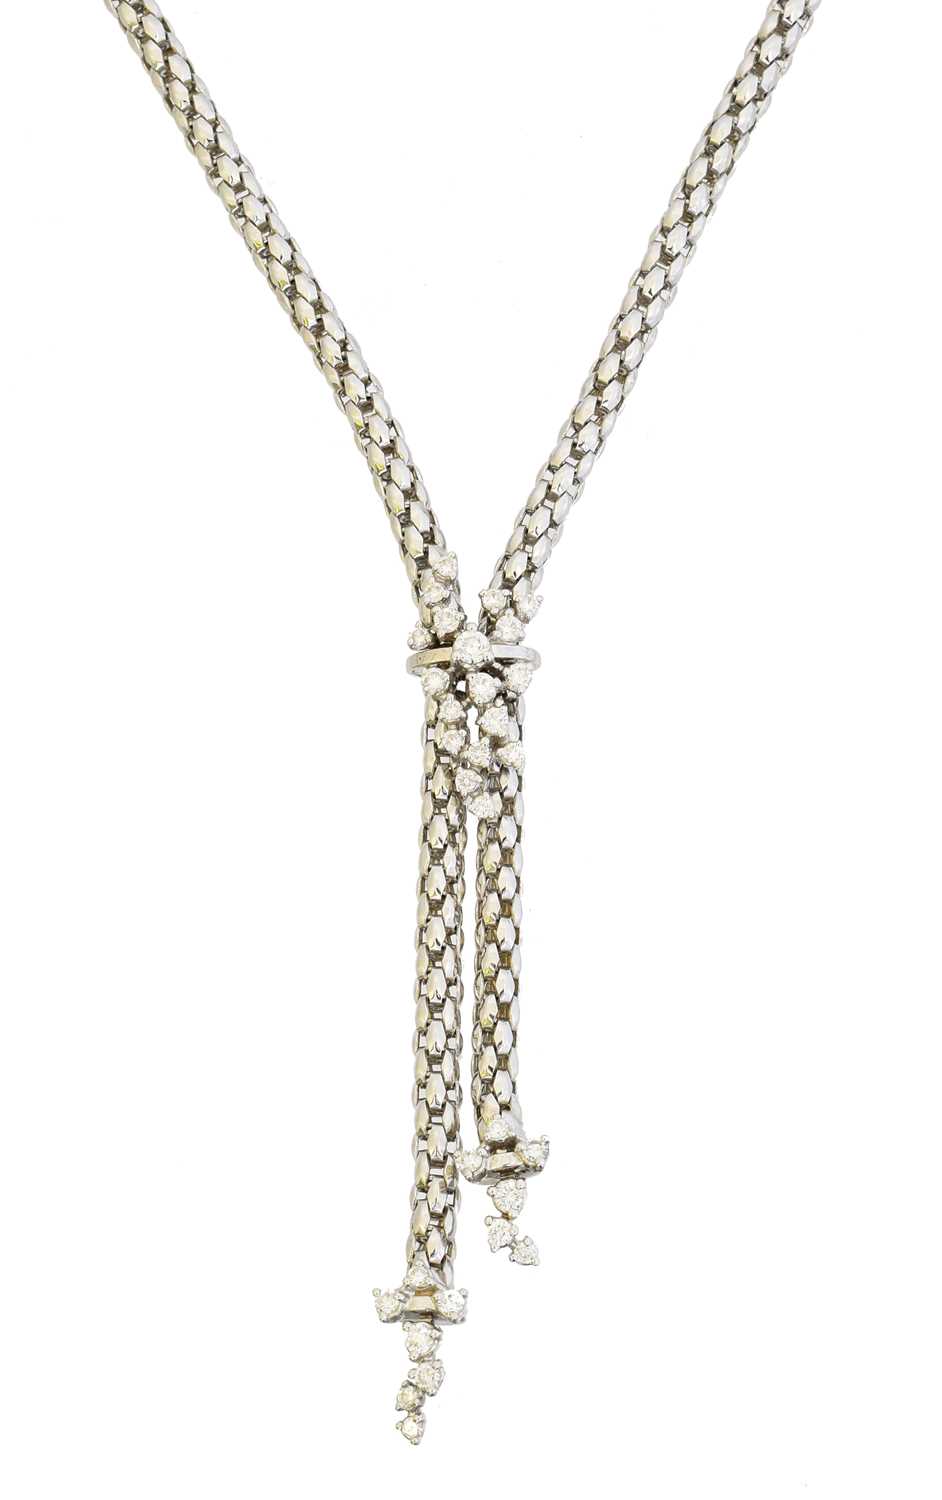 Lot 66 - An 18ct gold diamond lariat necklace by Fope